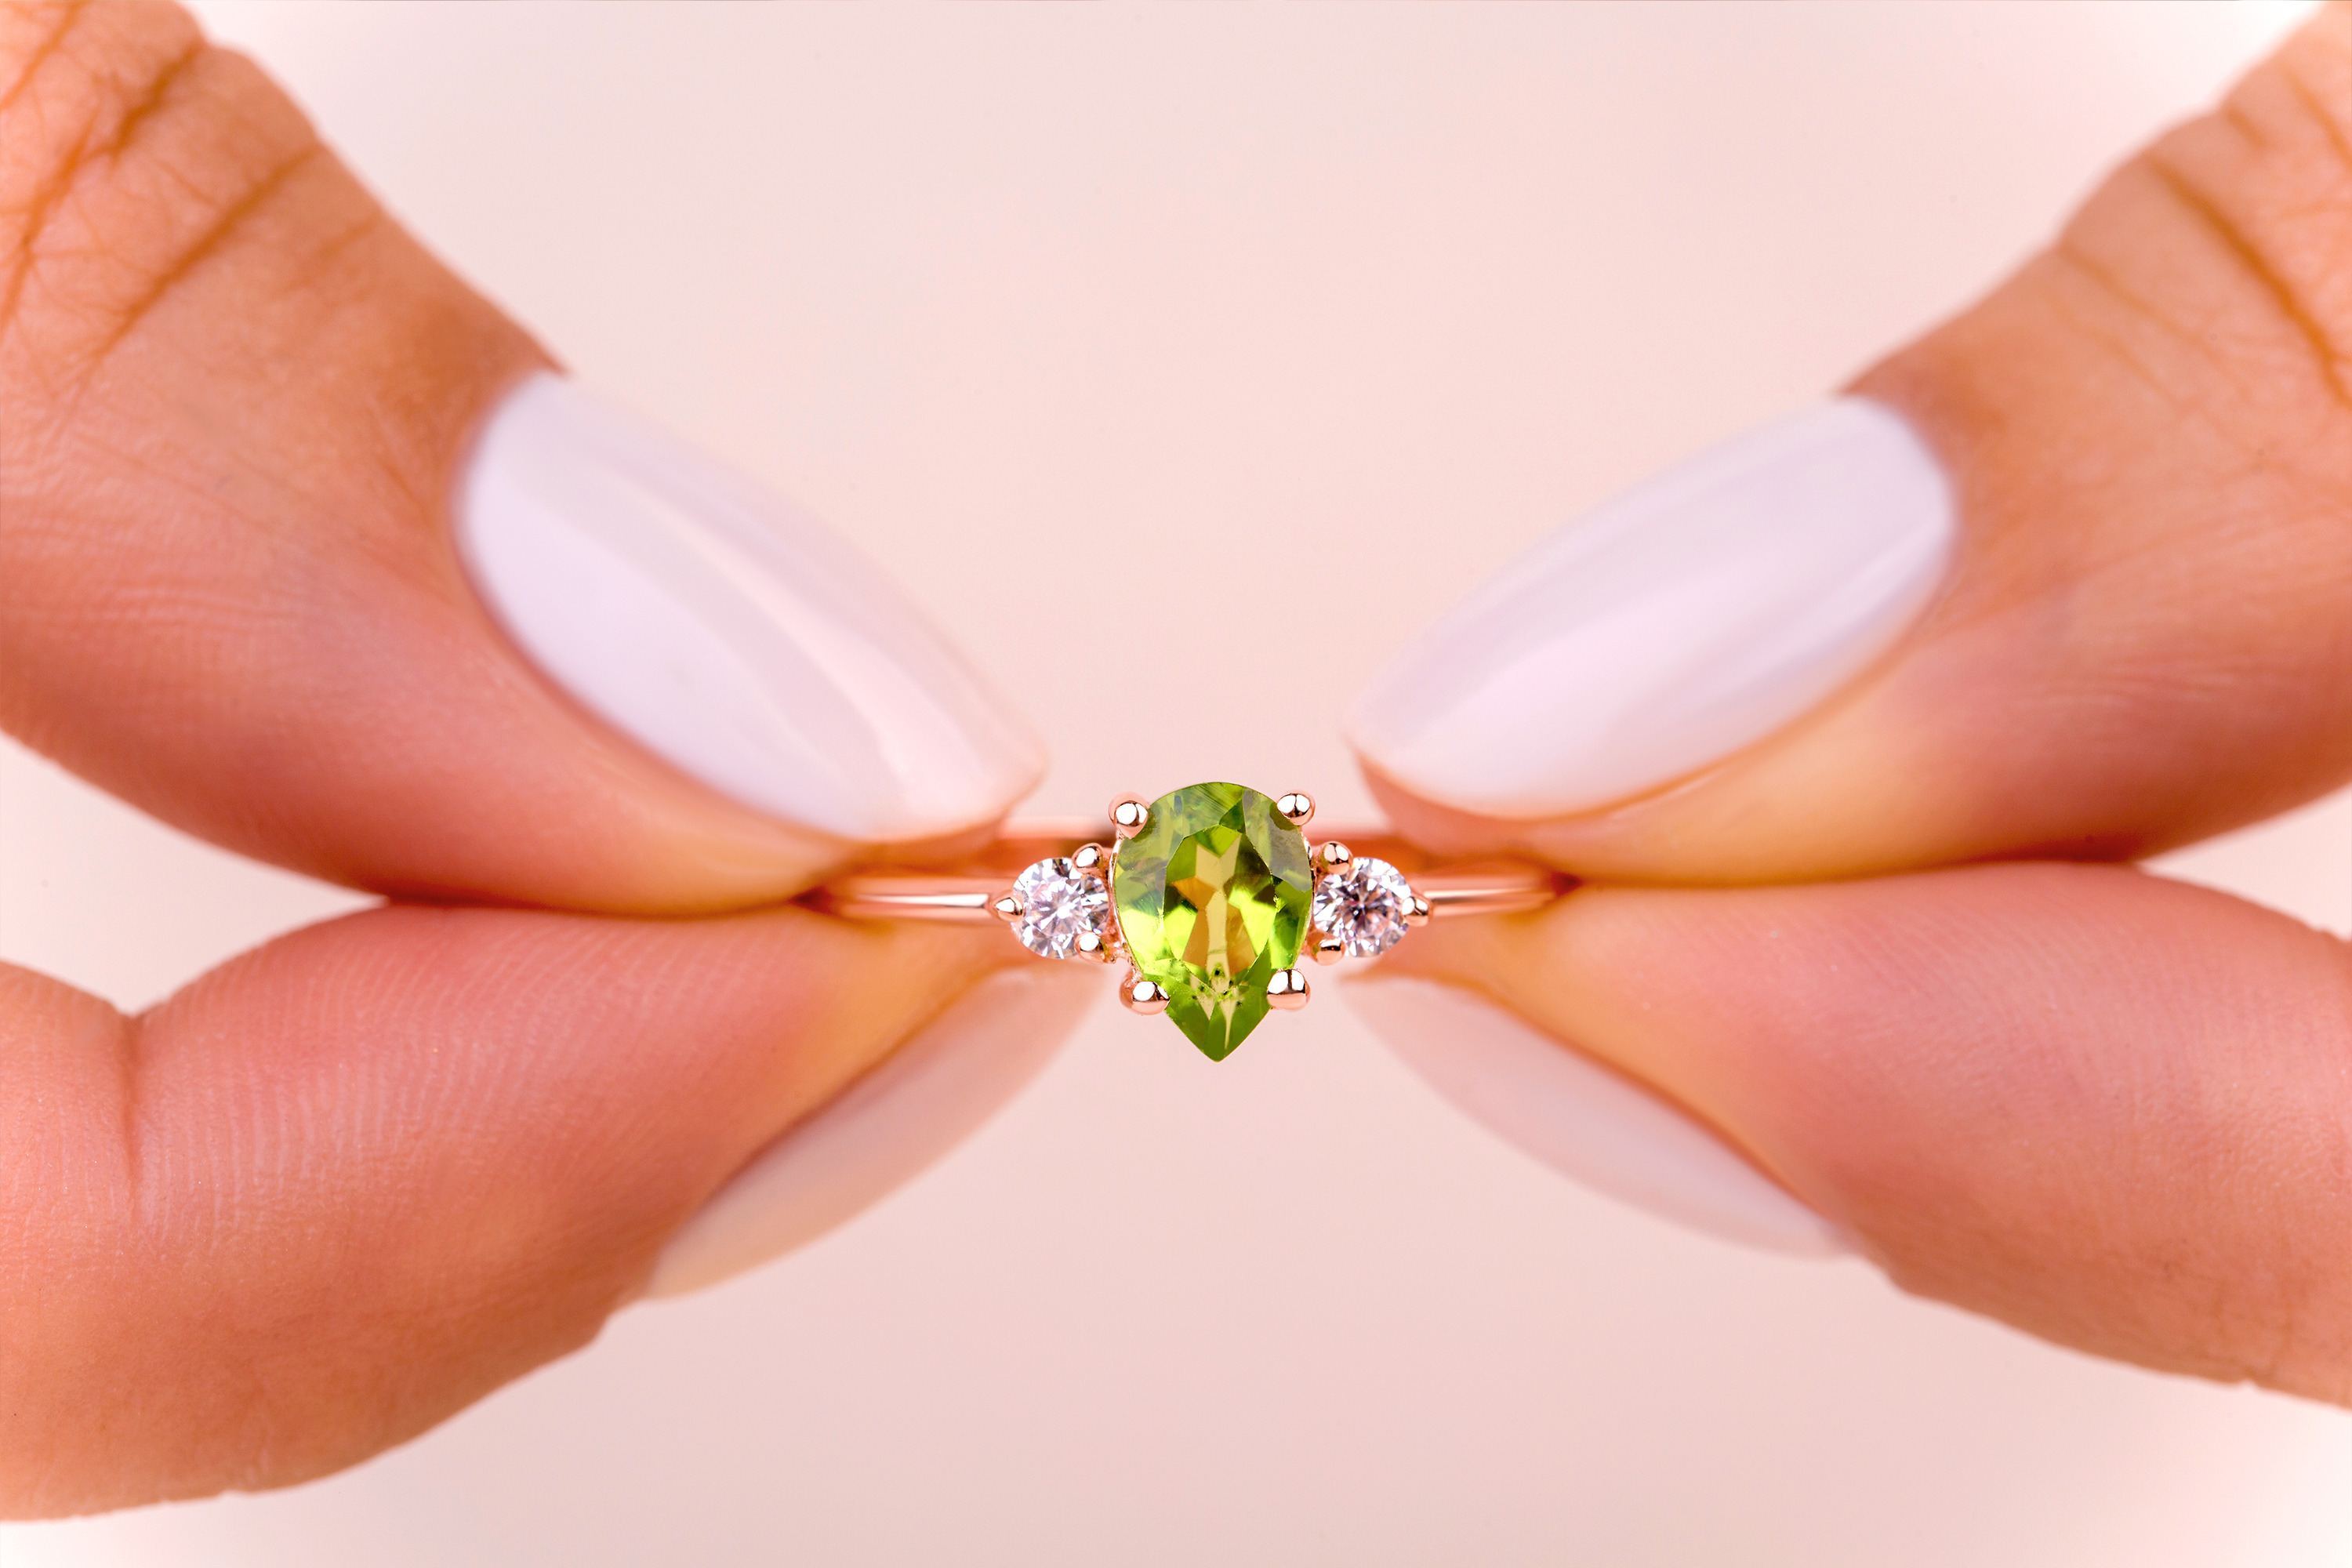 A woman is holding a Peridot gemstone ring in her fingers.